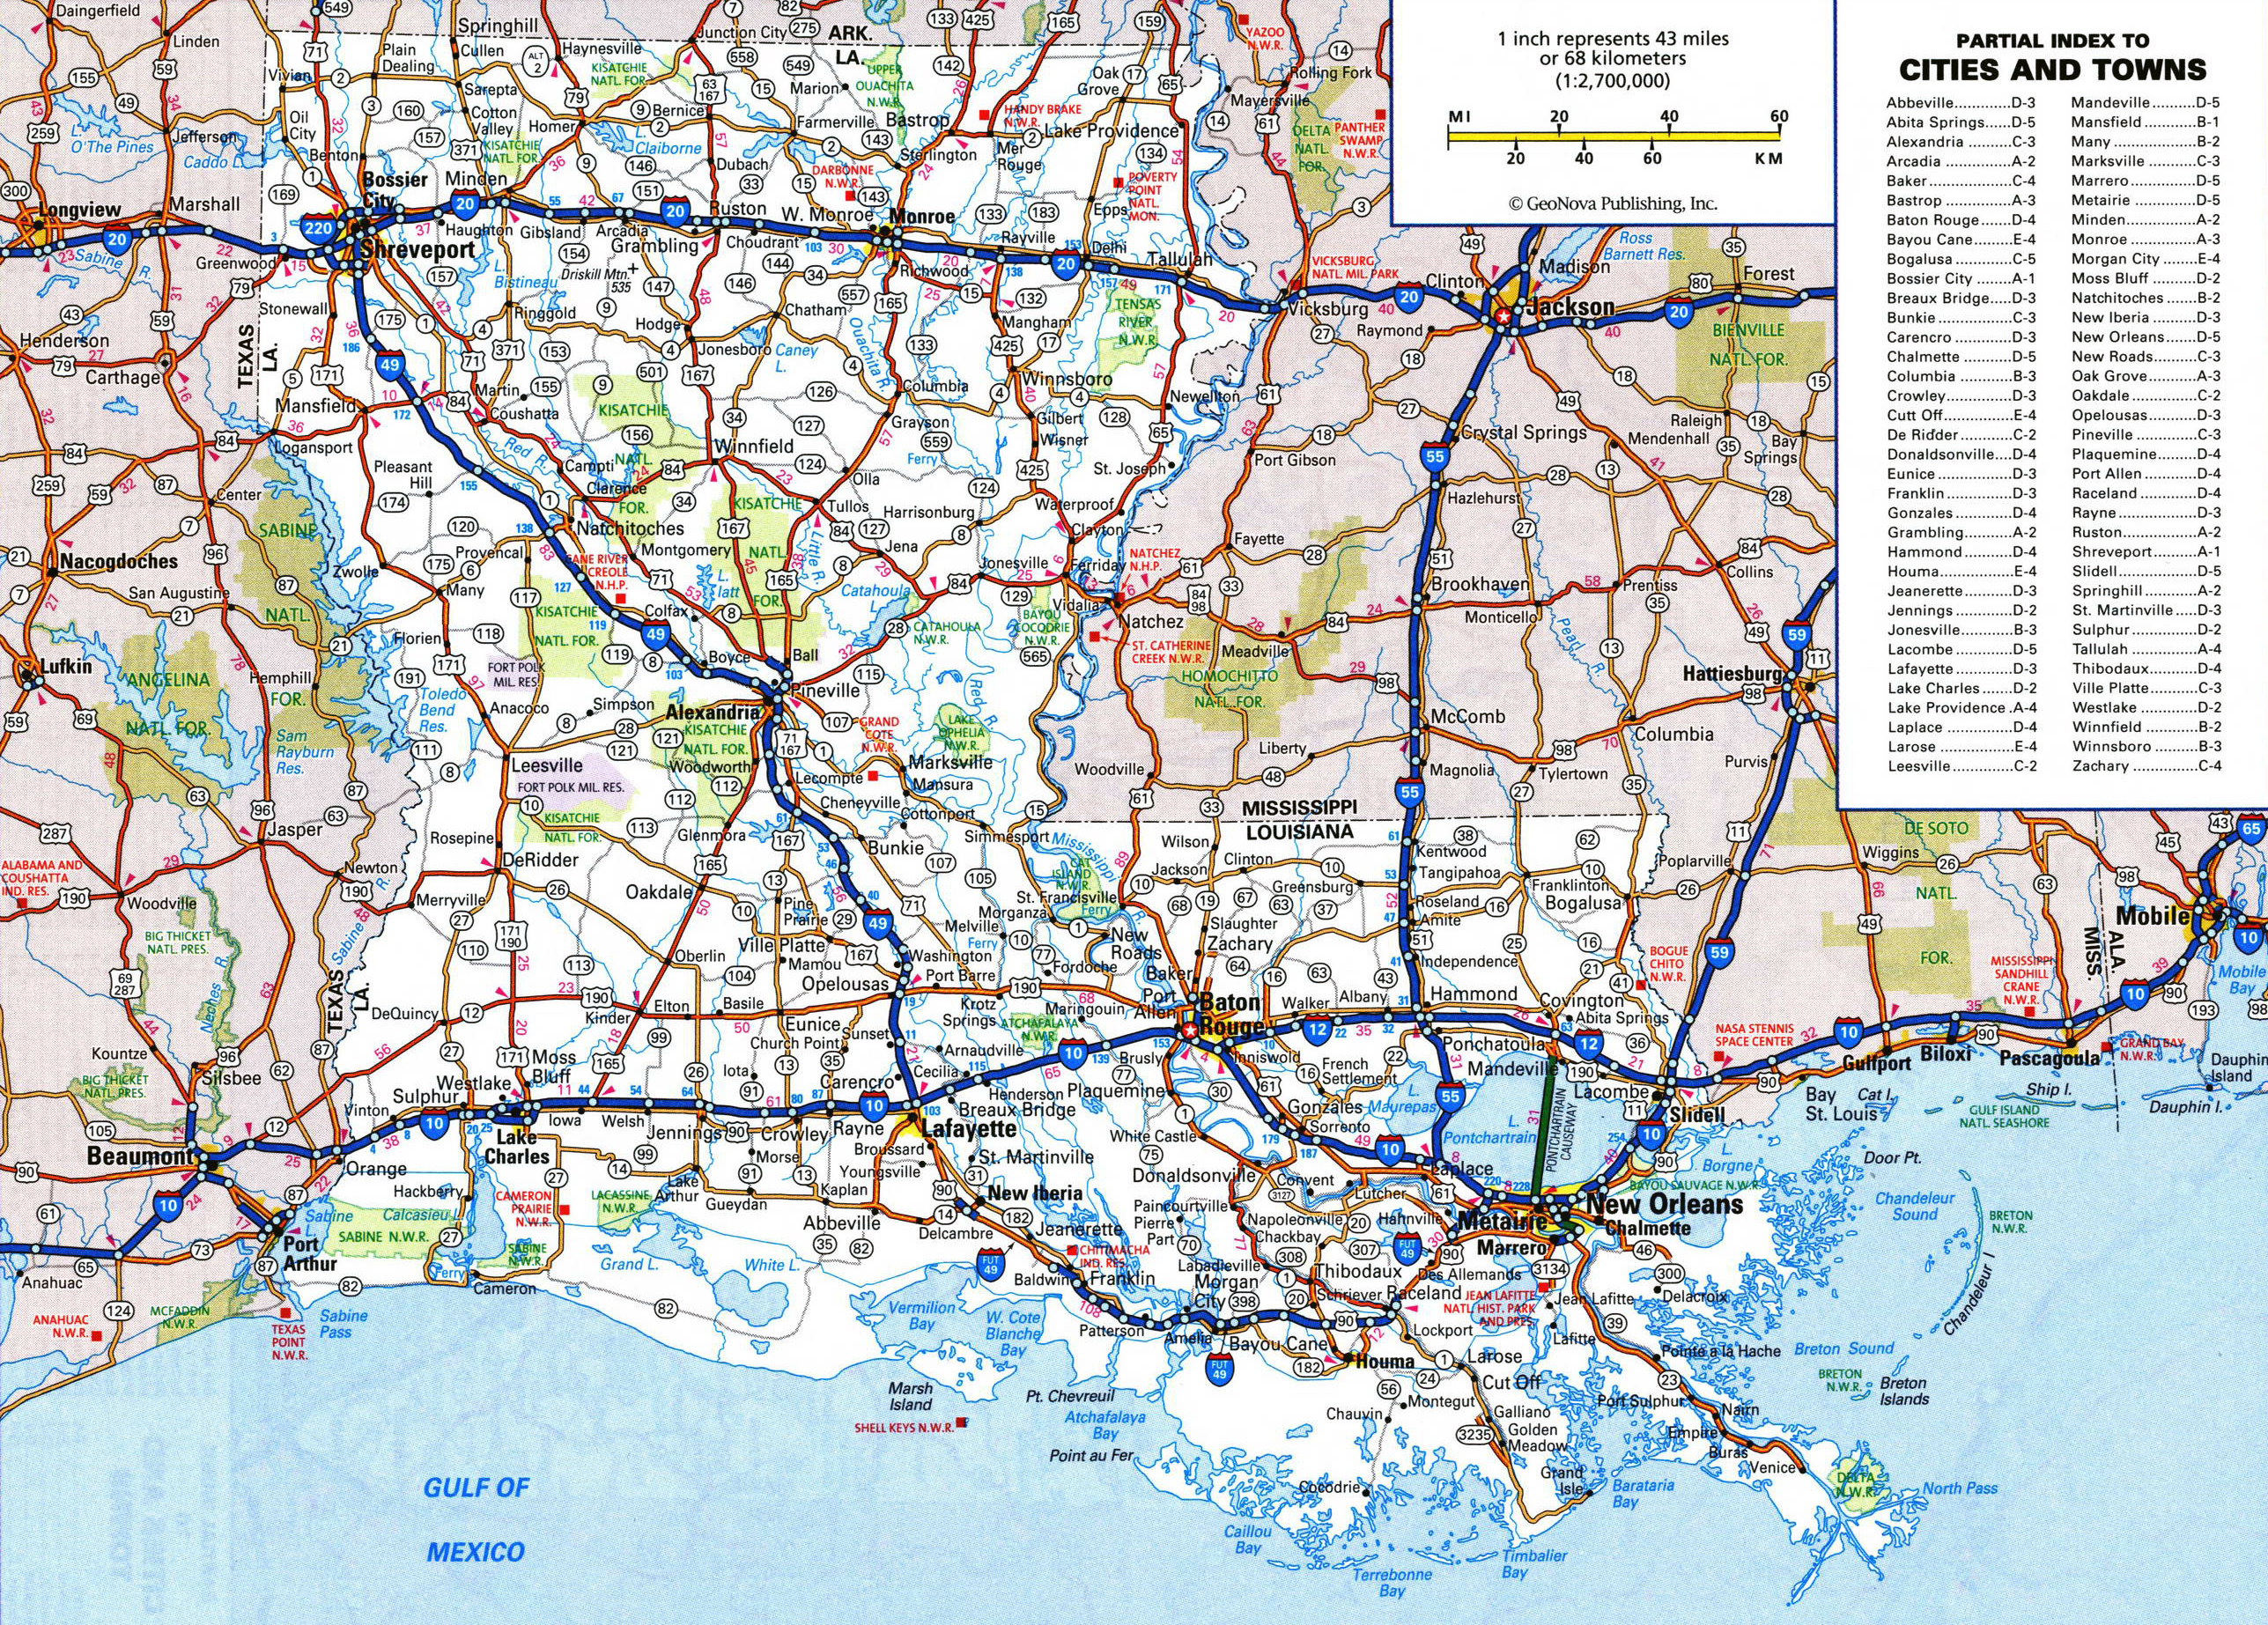 louisiana-map-with-towns-and-parishes-walden-wong